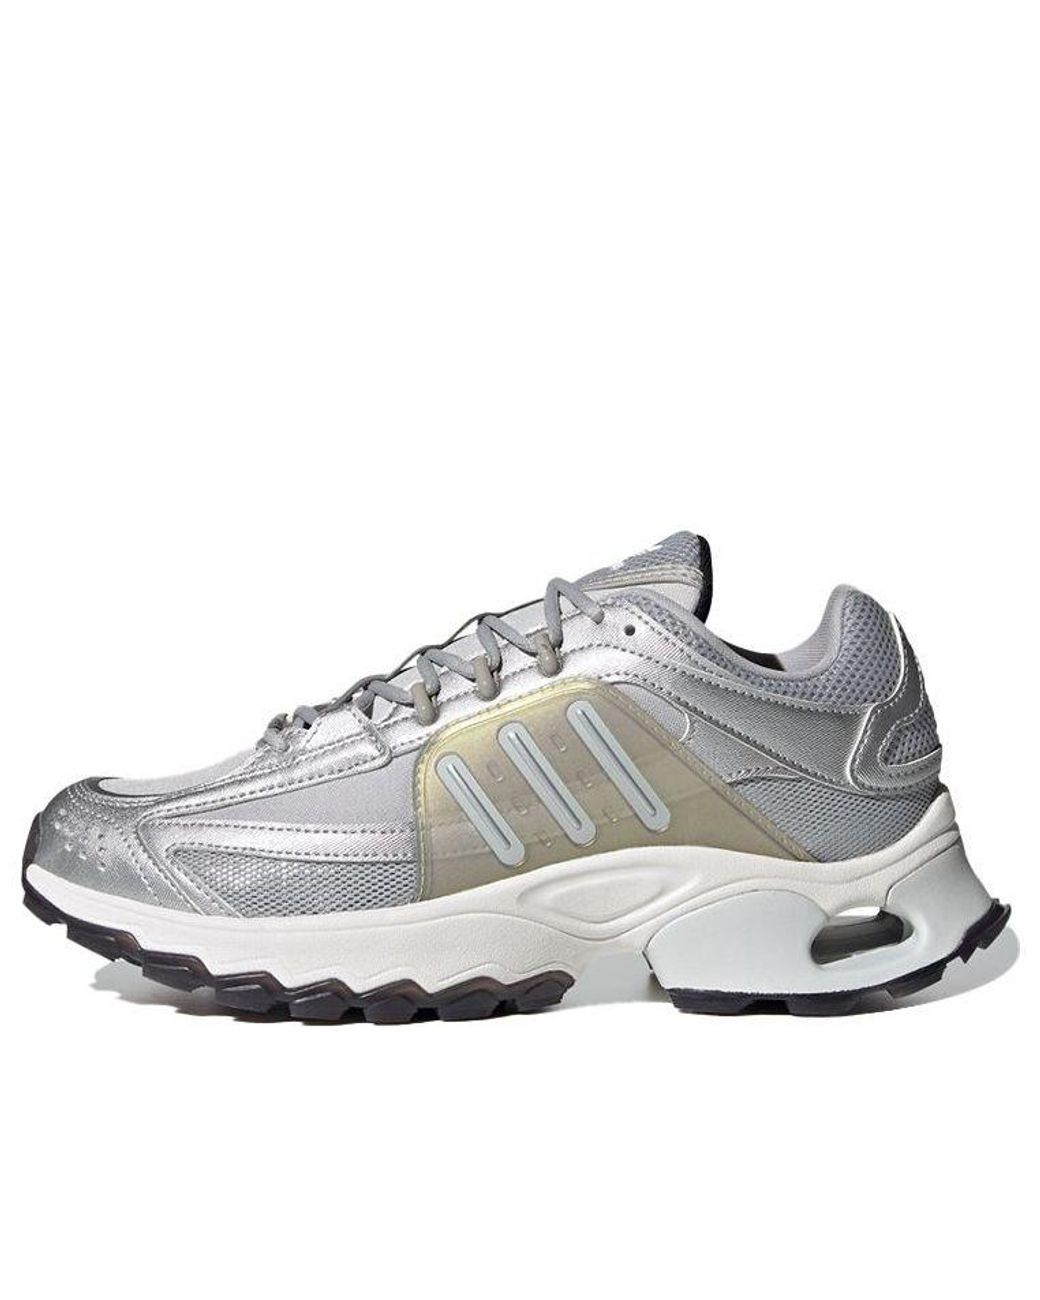 adidas Originals Thesia Shoes Silver/grey in White | Lyst